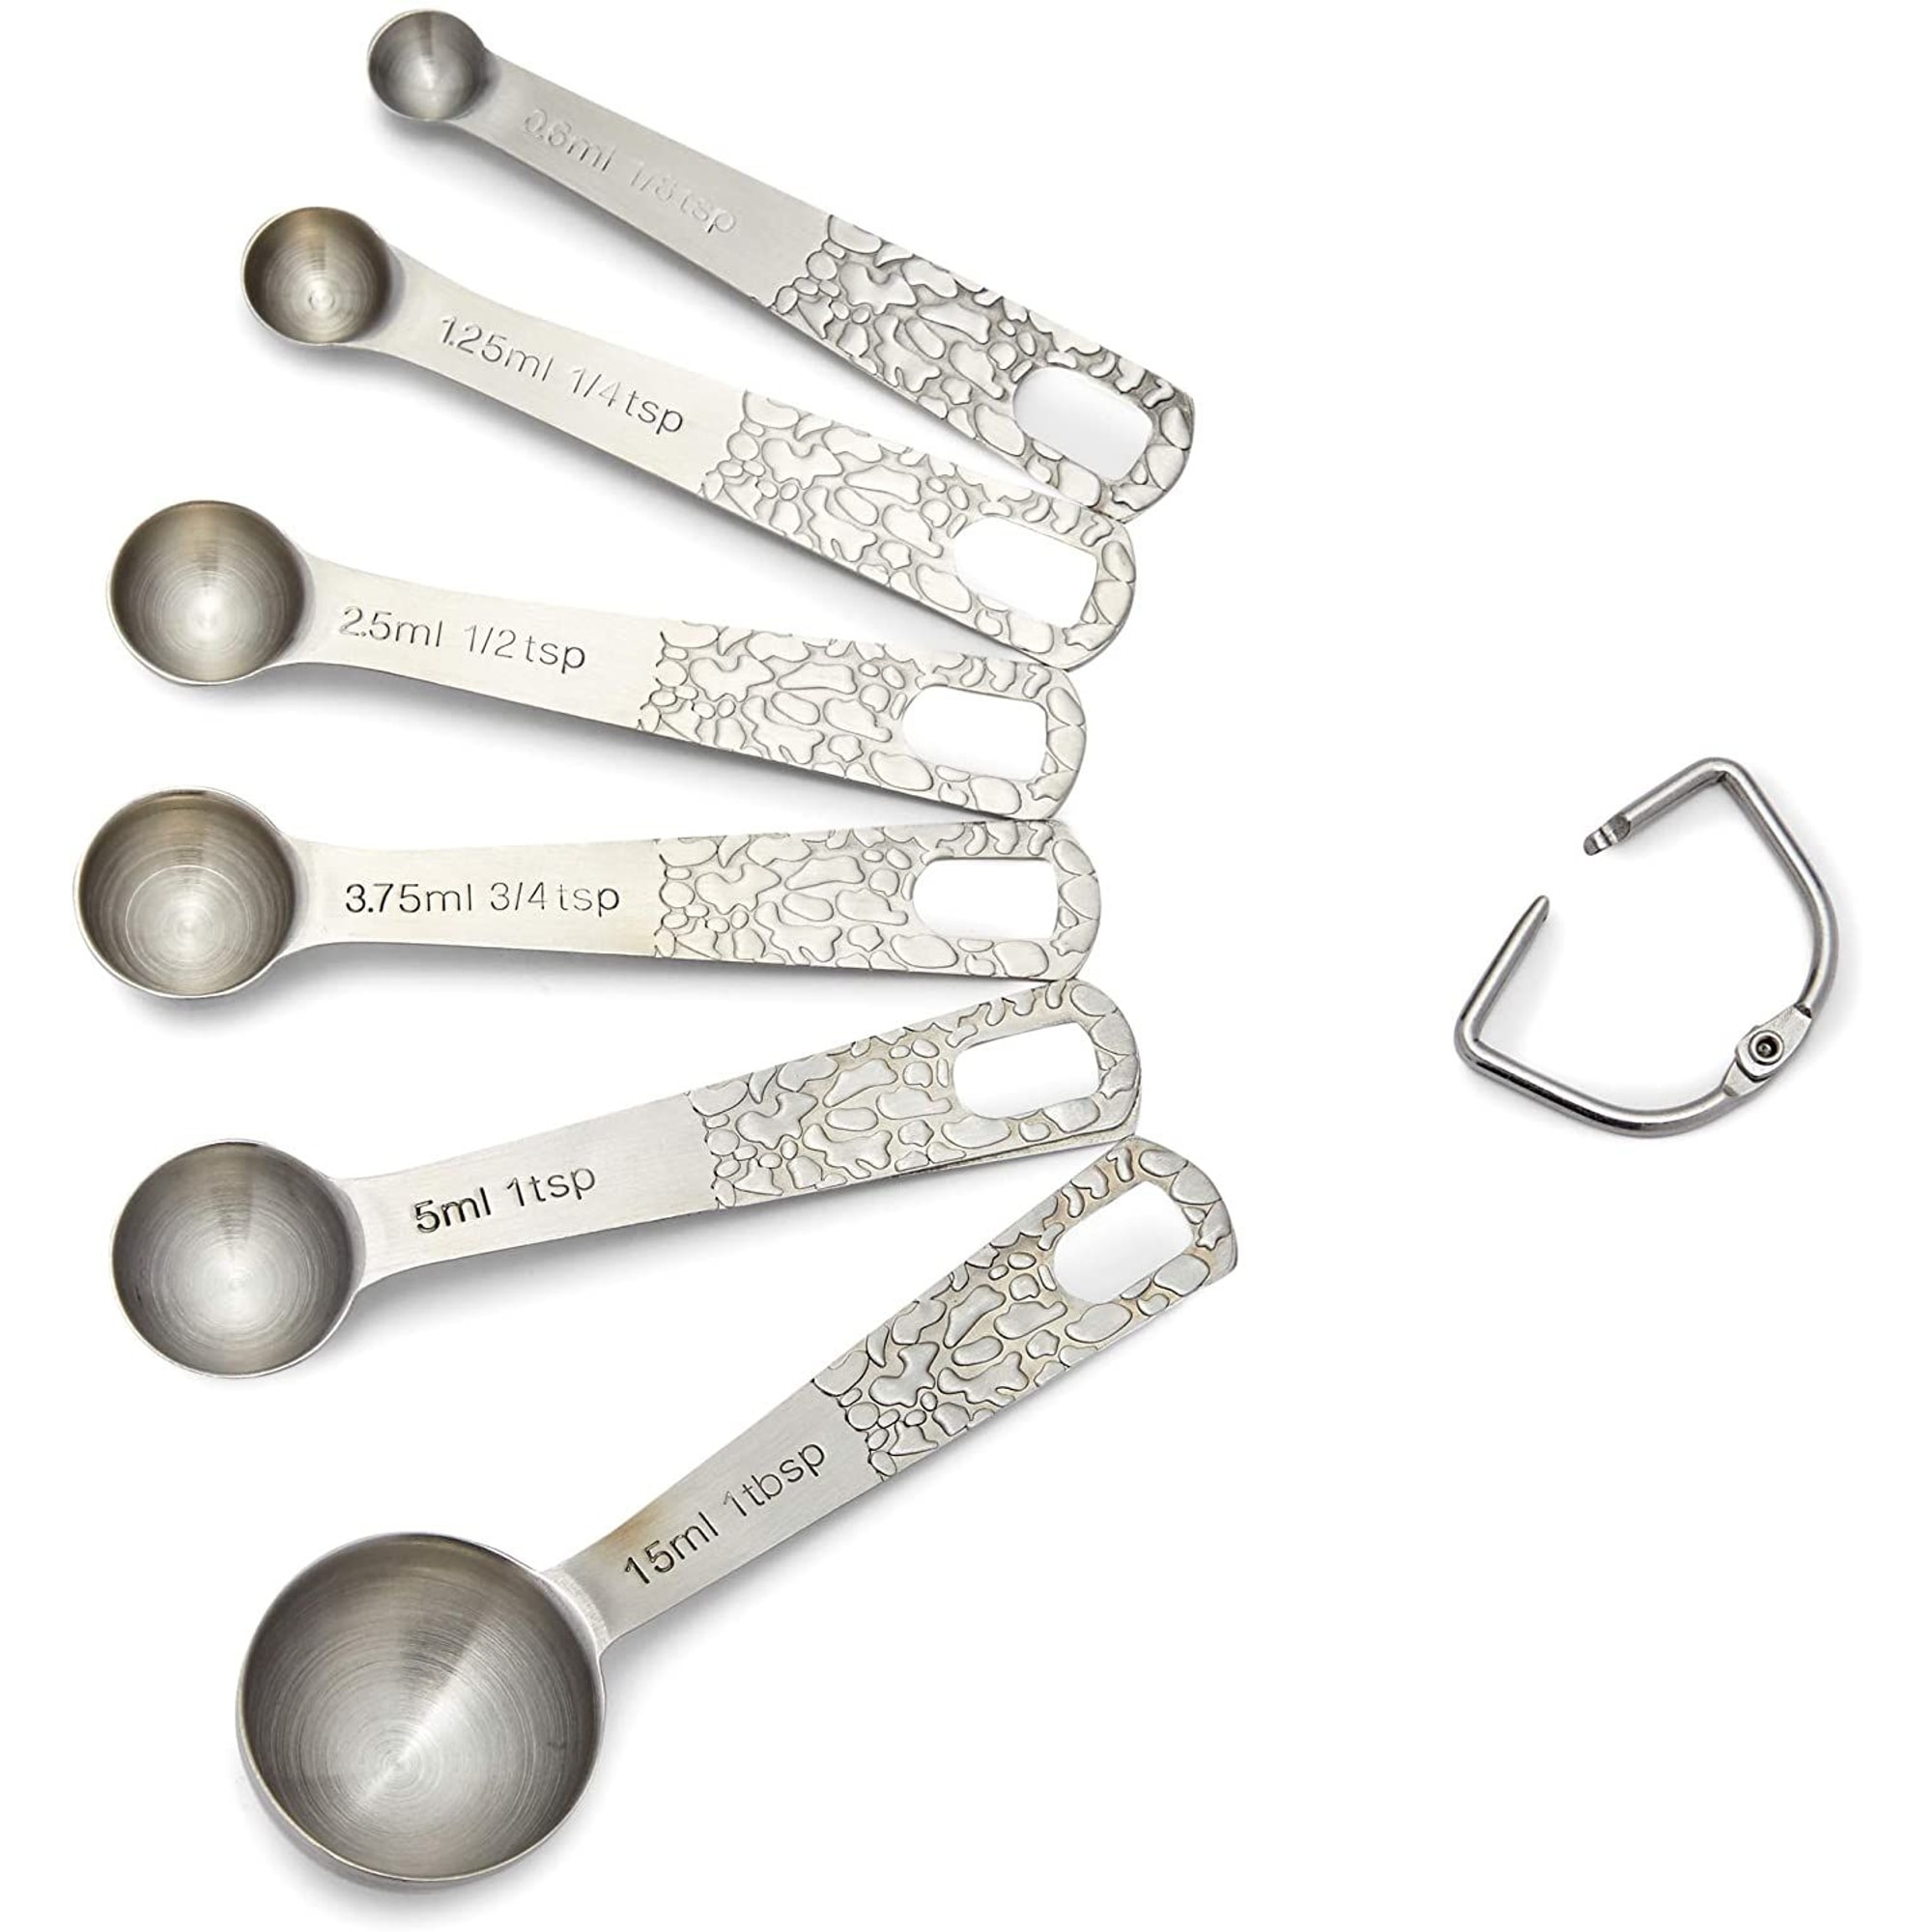 Cook's Corner 8-piece Black Stainless Steel Measuring Cup and Spoon Set -  On Sale - Bed Bath & Beyond - 10473532